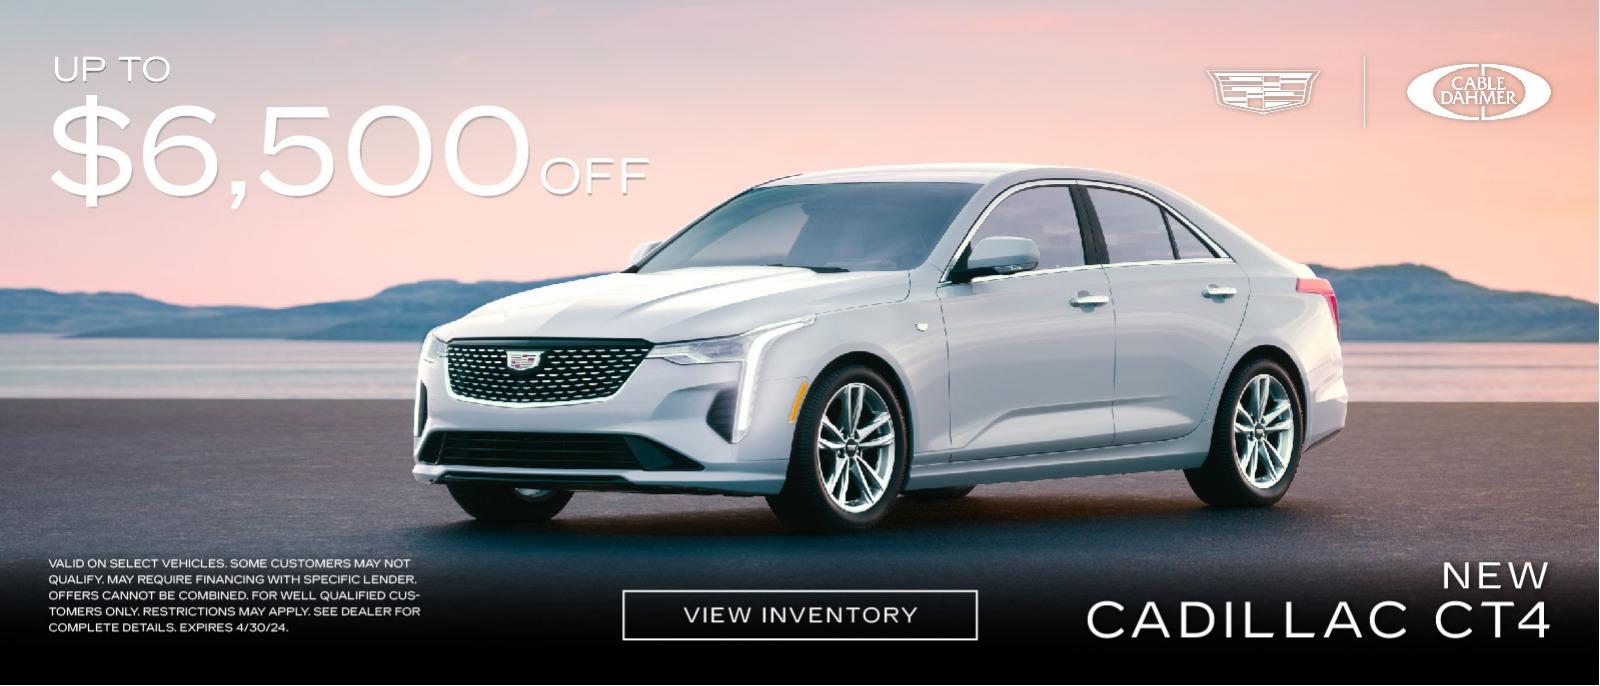 up to $6500 off Cadillac CT4